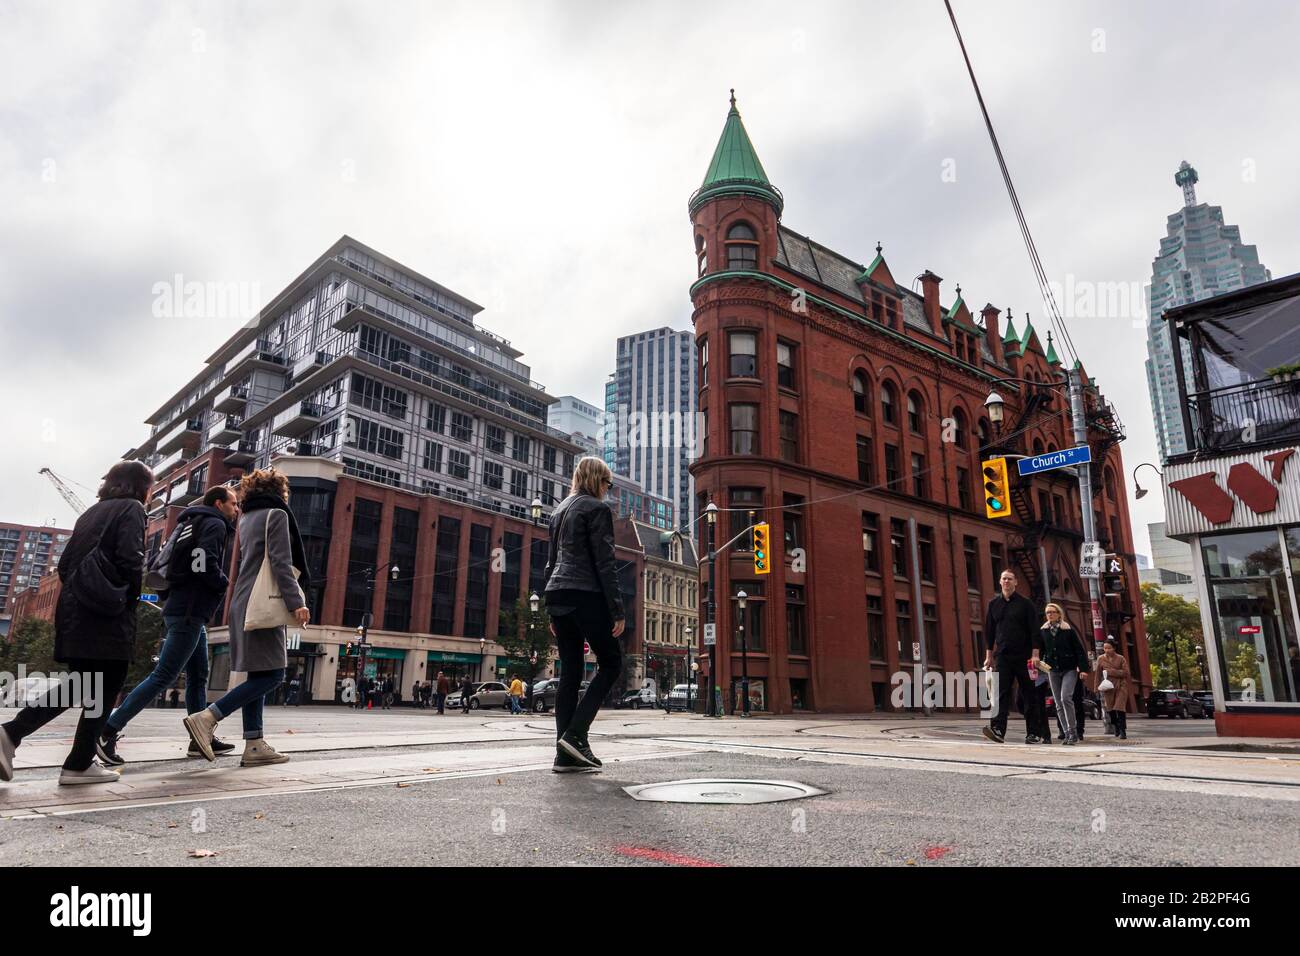 People walking across the street in-front of the famous Gooderham Building / Flatiron Building in Toronto. Stock Photo